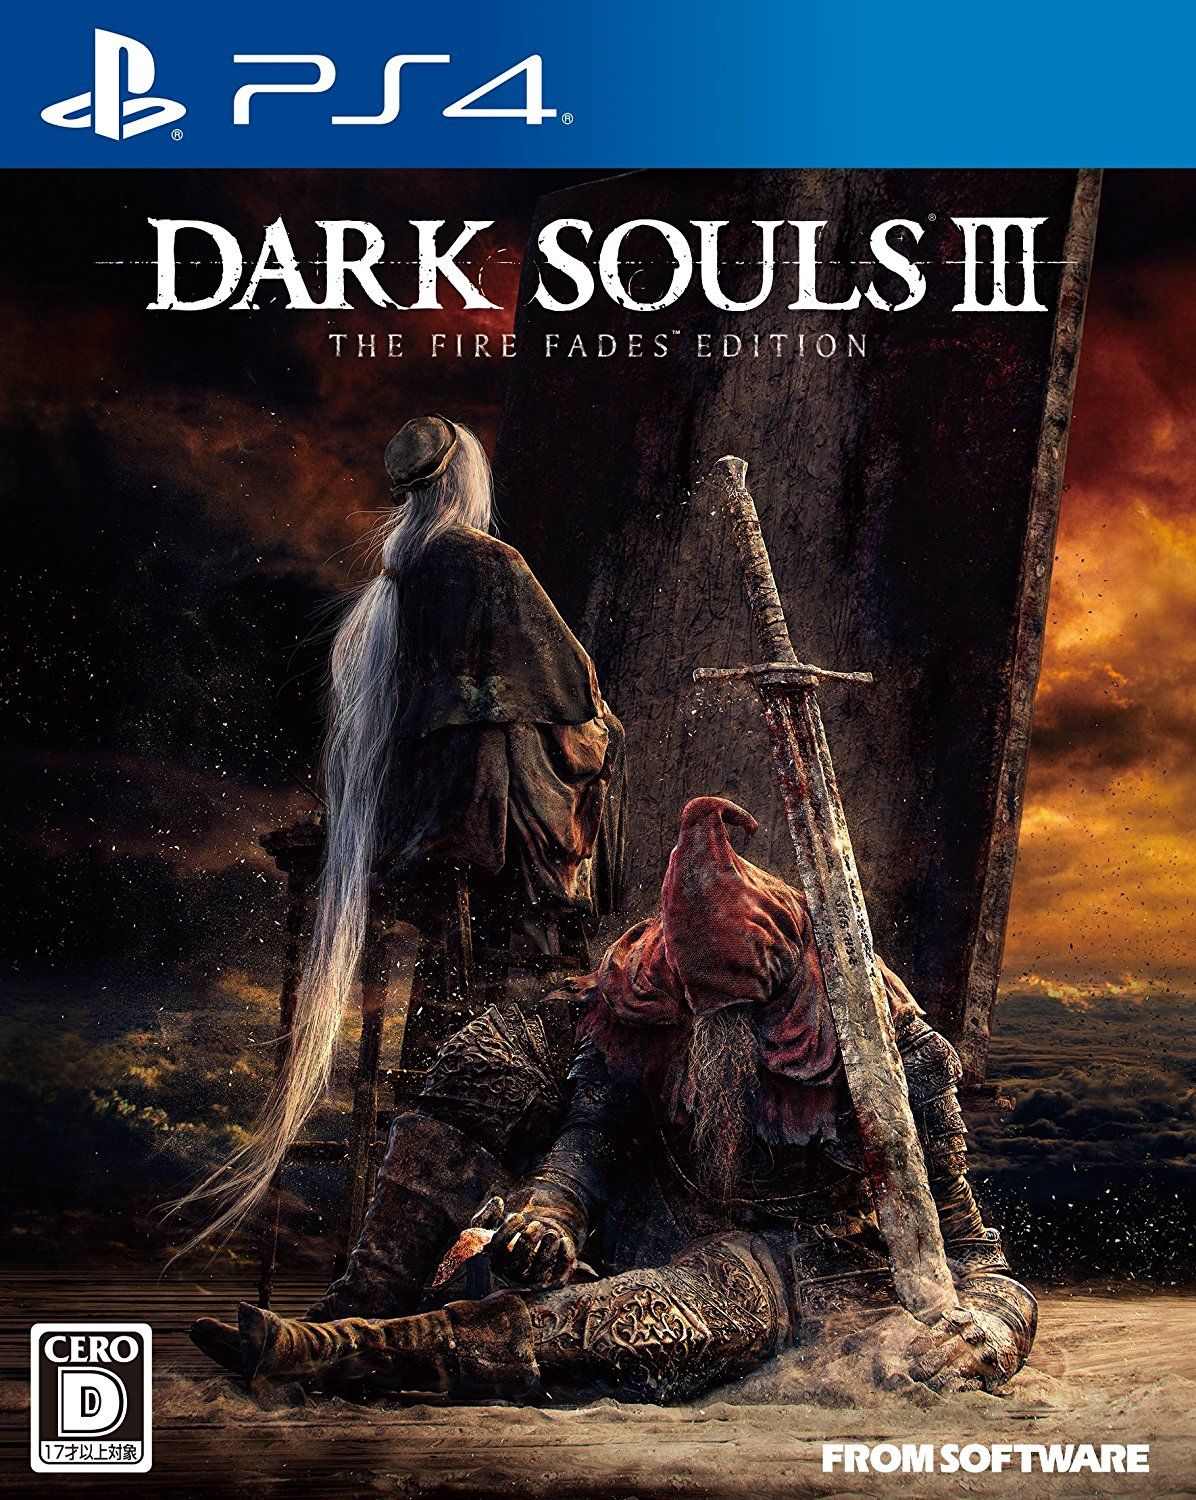 dark-souls-iii-dition-goty-the-fire-fades-et-dlc-the-ringed-city-thm-magazine